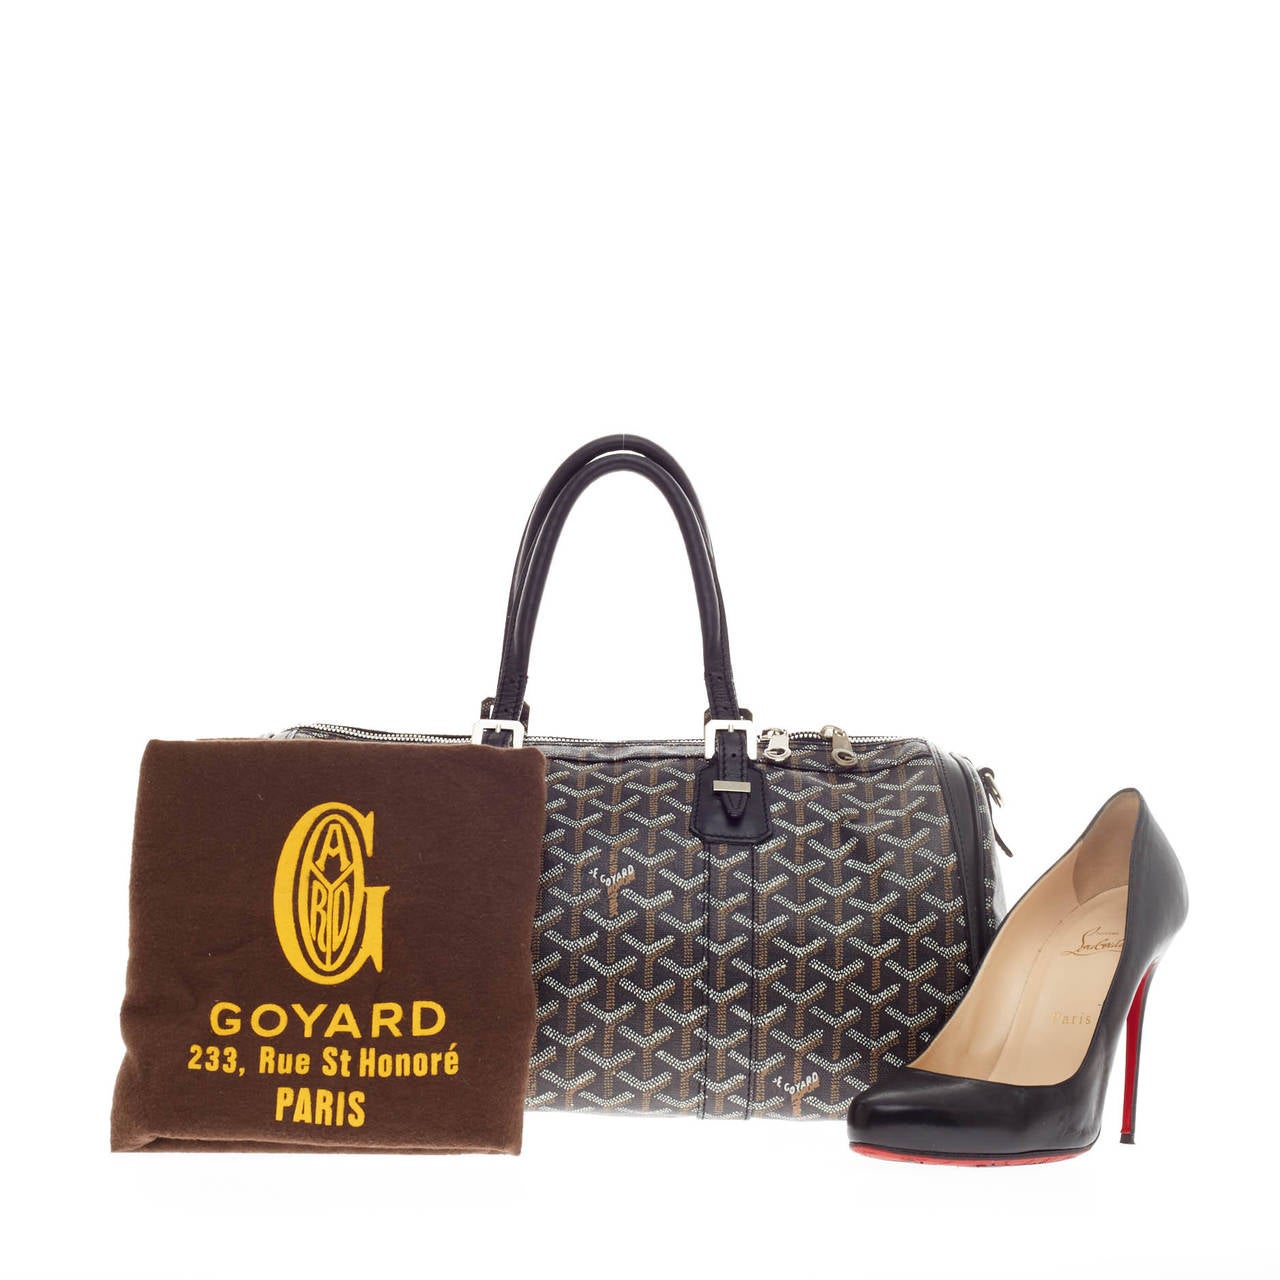 This authentic Goyard Croisiere Canvas 35 is an exclusive chic tote perfect for every fashionista. Crafted from Goyard's iconic black, white and brown chevron print in coated canvas, this no-fuss duffle features dual-rolled leather top handles,